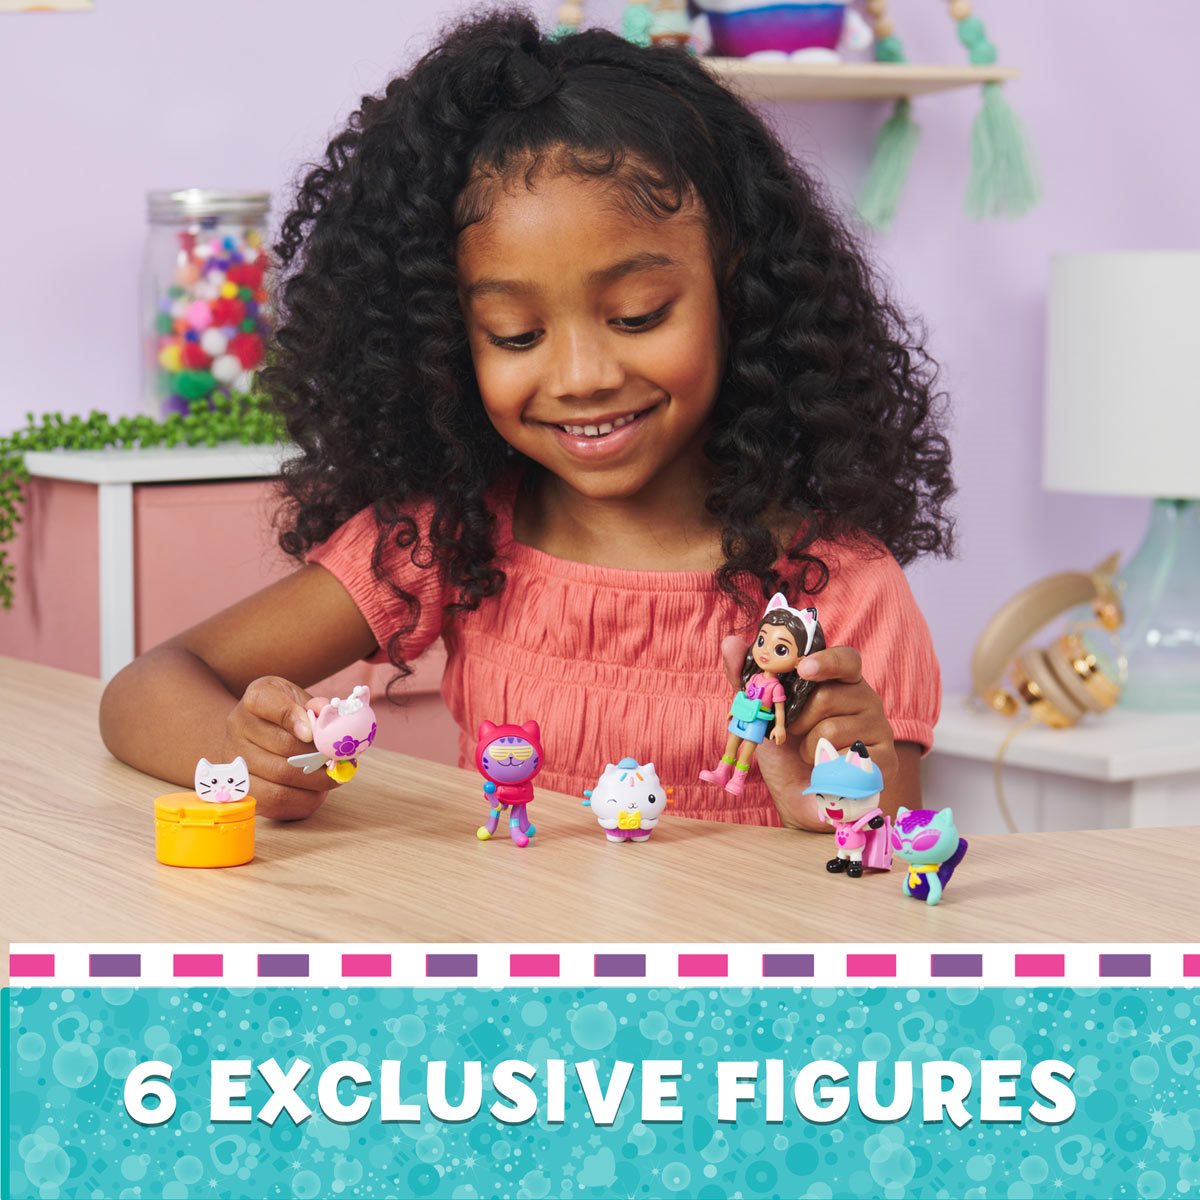 Gabby's Dollhouse, Deluxe Figure Gift Set with 7 Toy Figures and Surprise  Acc